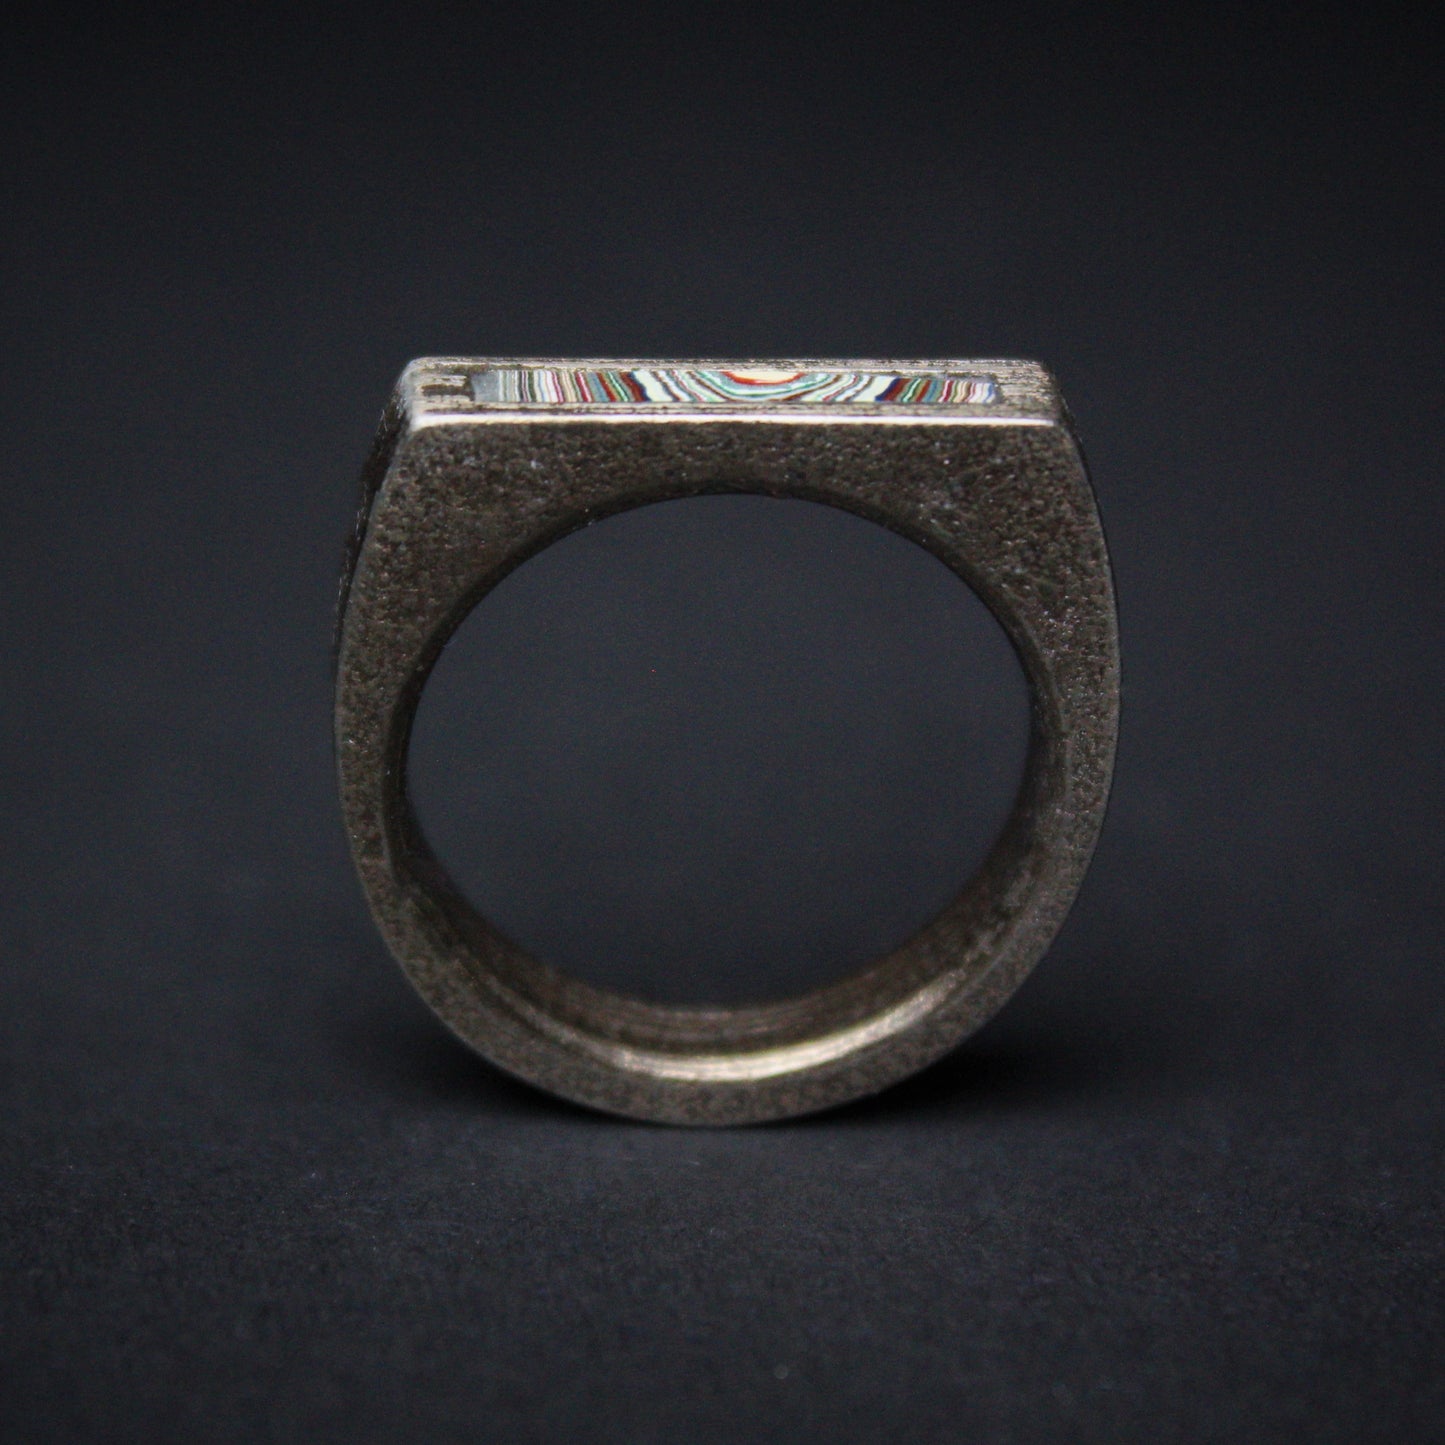 3D Printed Ring Inlaid with 1960's Ford Fordite